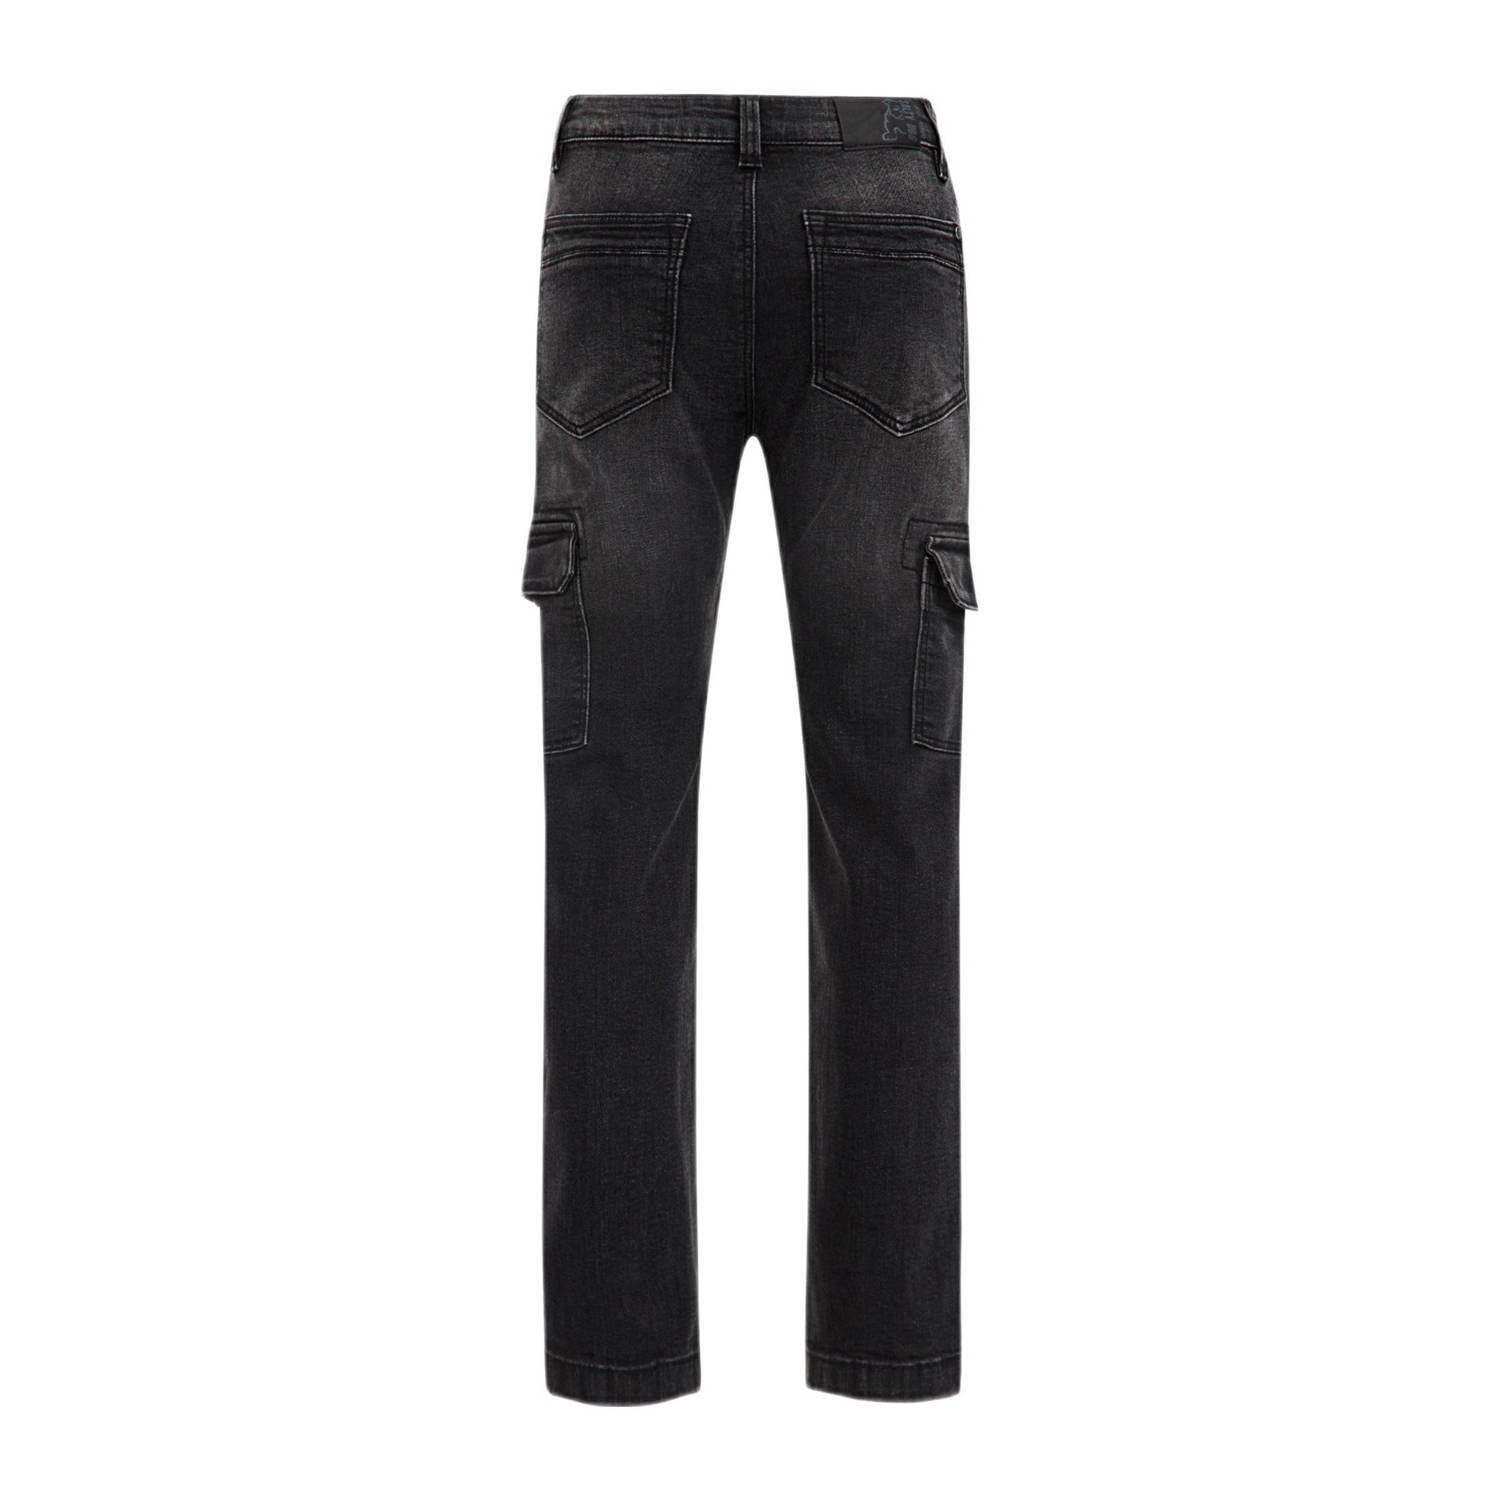 WE Fashion regular fit jeans black faded